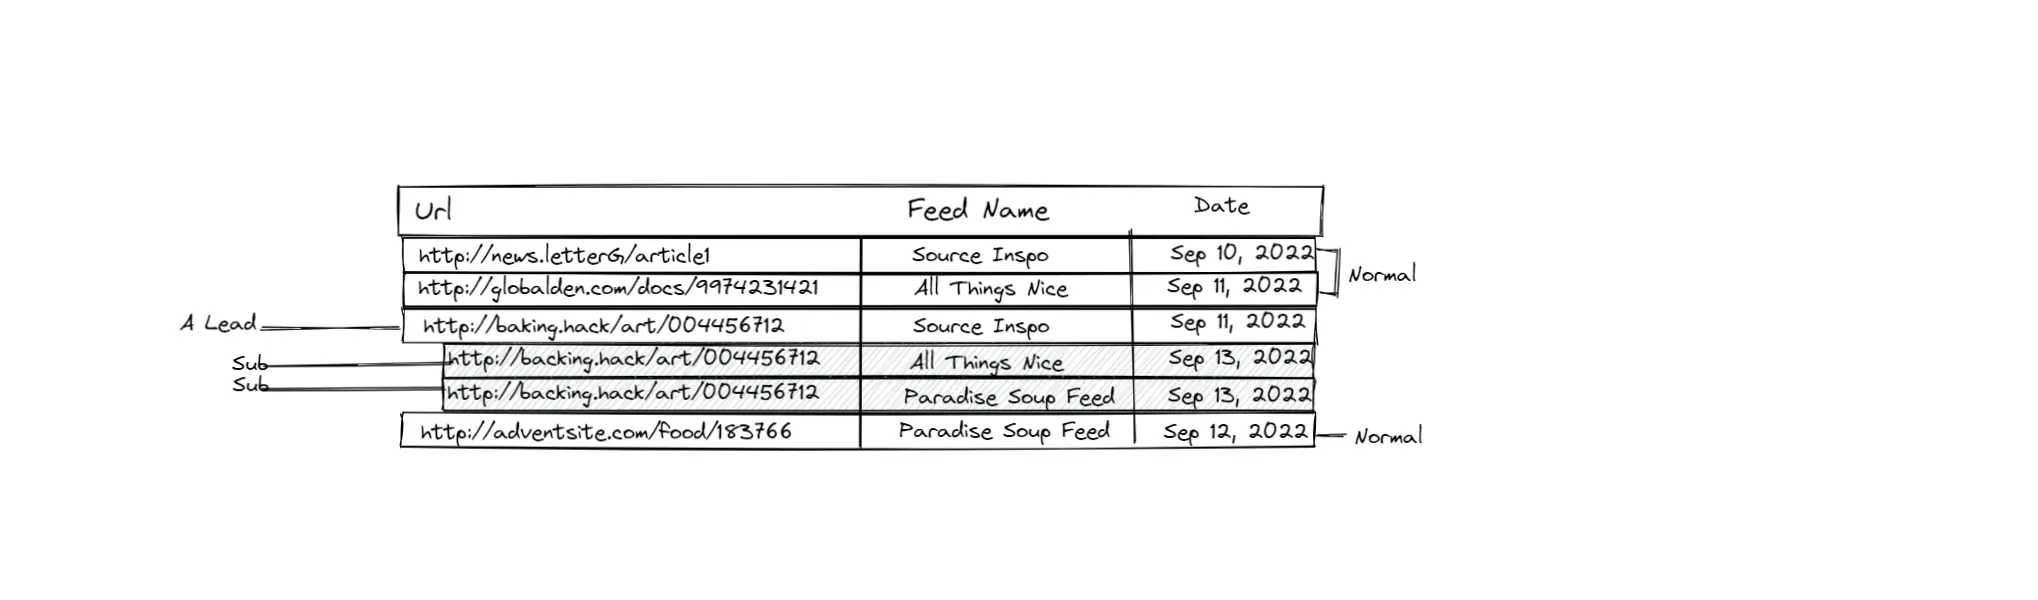 An illustration of a table containing three column headers: Url, Feed Name, and Date. It contains six rows of article links received from different news feed sources that got recorded from the dates September 10, 11, 12, and 13. The third, fourth, and fifth rows have the same article links, but were retrieved from different sources. These rows are grouped together due their reference to the exact same article link. The illustration refers to the third row which came in on September 11 as the Lead of the group, and refers to the fourth and fifth rows that both came in on September 13 as its Sub. Other rows not belonging to a group are referred to as Normal.